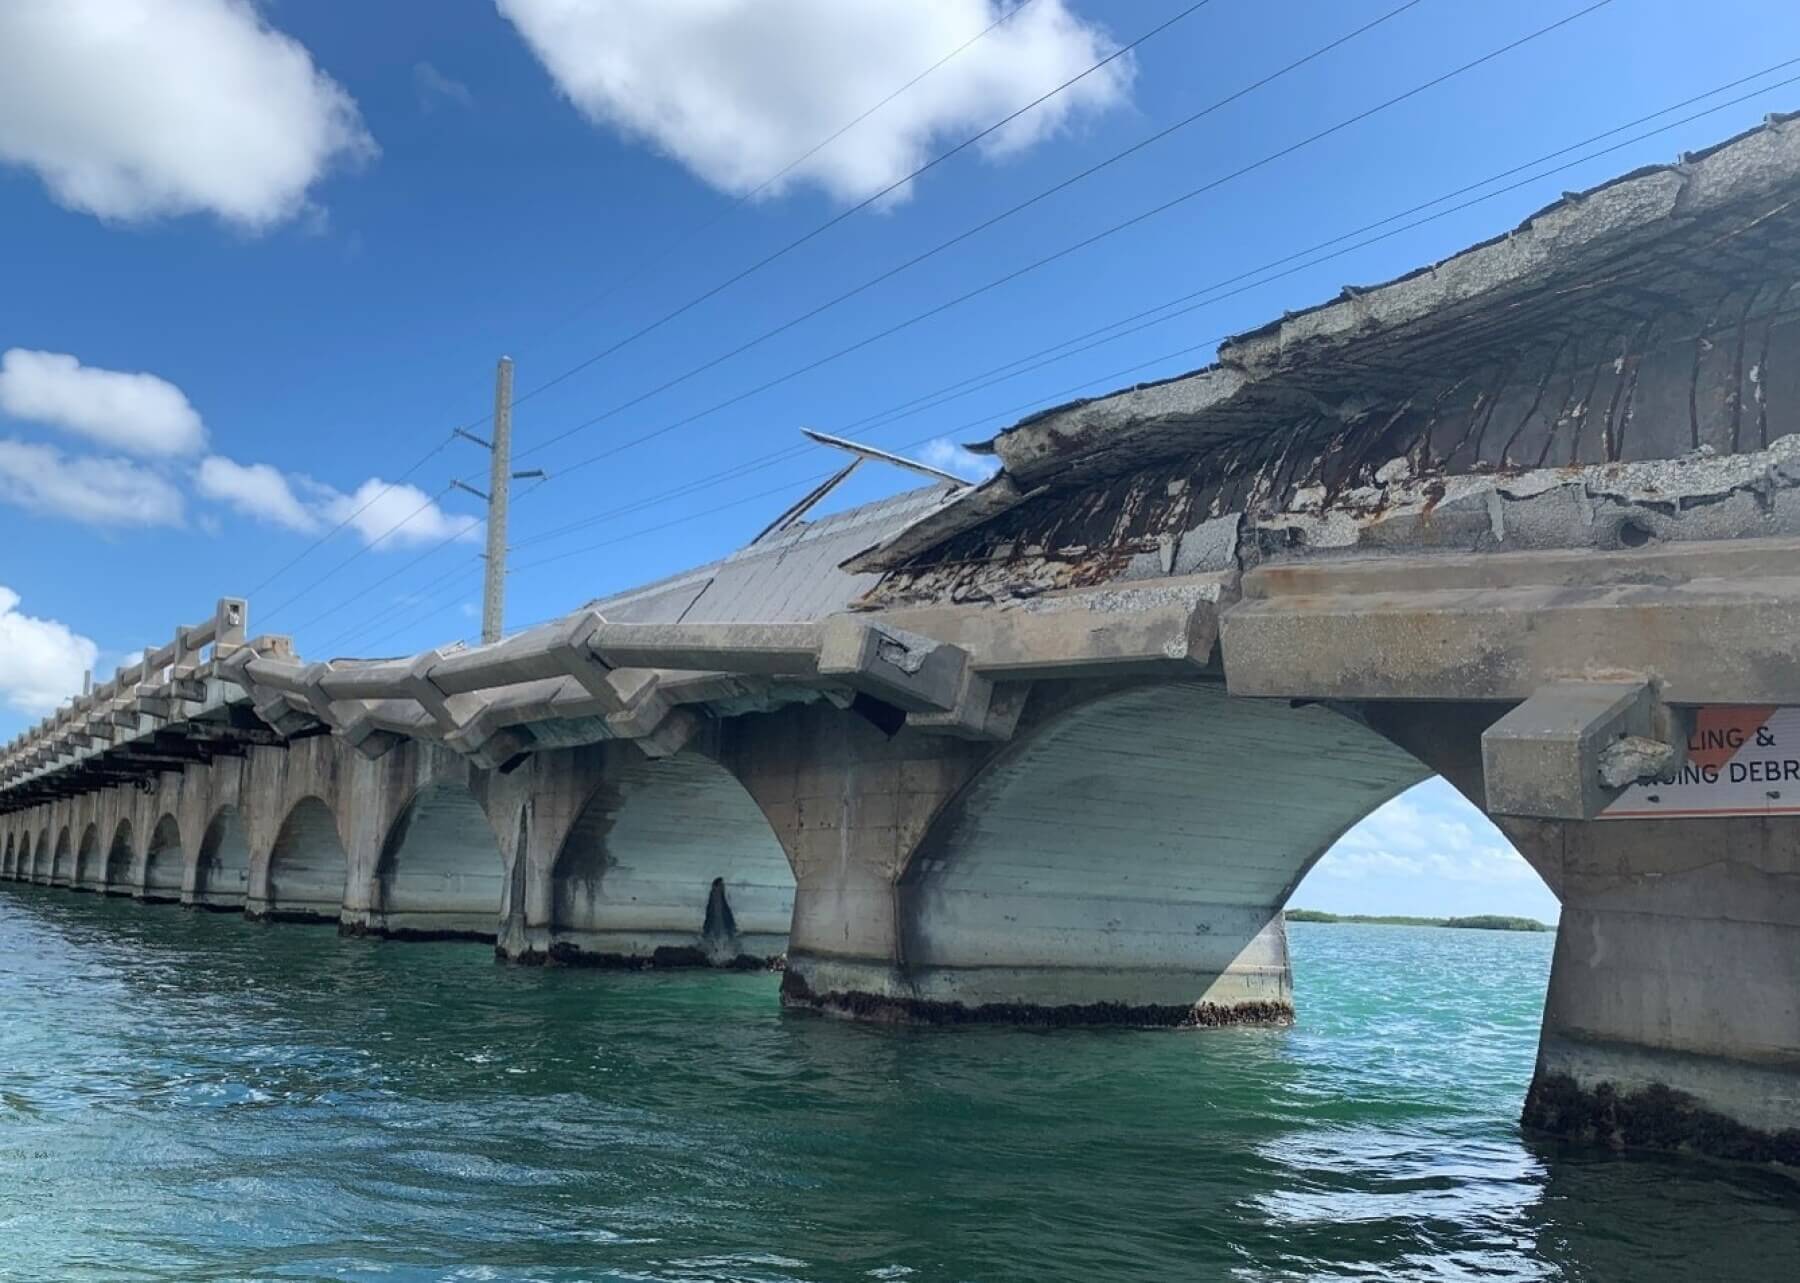 The Shark Channel Bridge that’s being rehabilitated